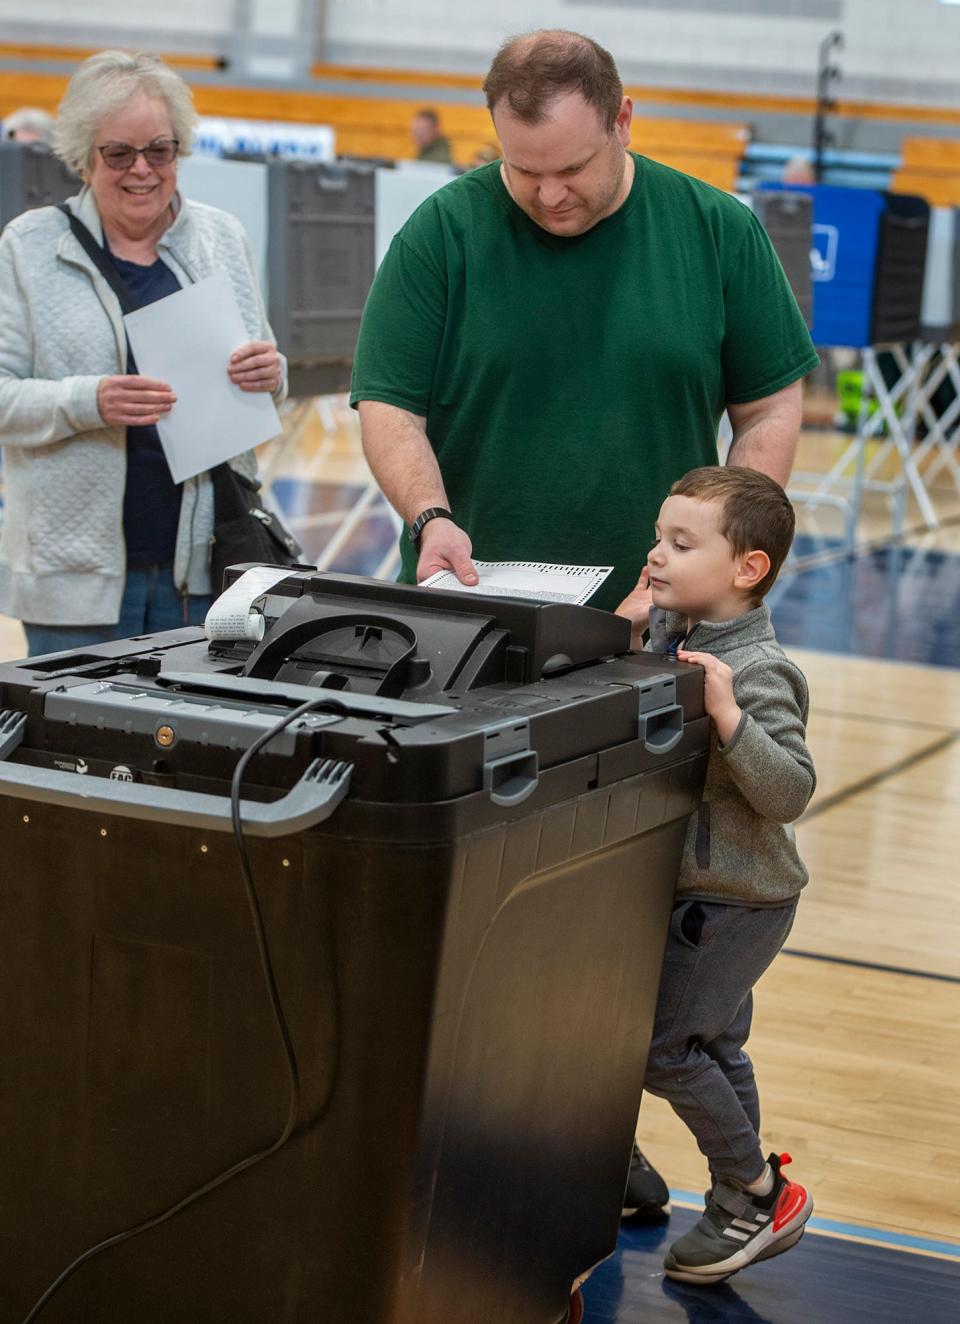 Cole Pithis, 4, of Franklin, watches as his father, Mike Pithis, cast his ballot inside the Franklin High School gym in a special election asking voters to fund construction of a new Tri-County Regional Vocational Technical High School, Oct. 24, 2023.